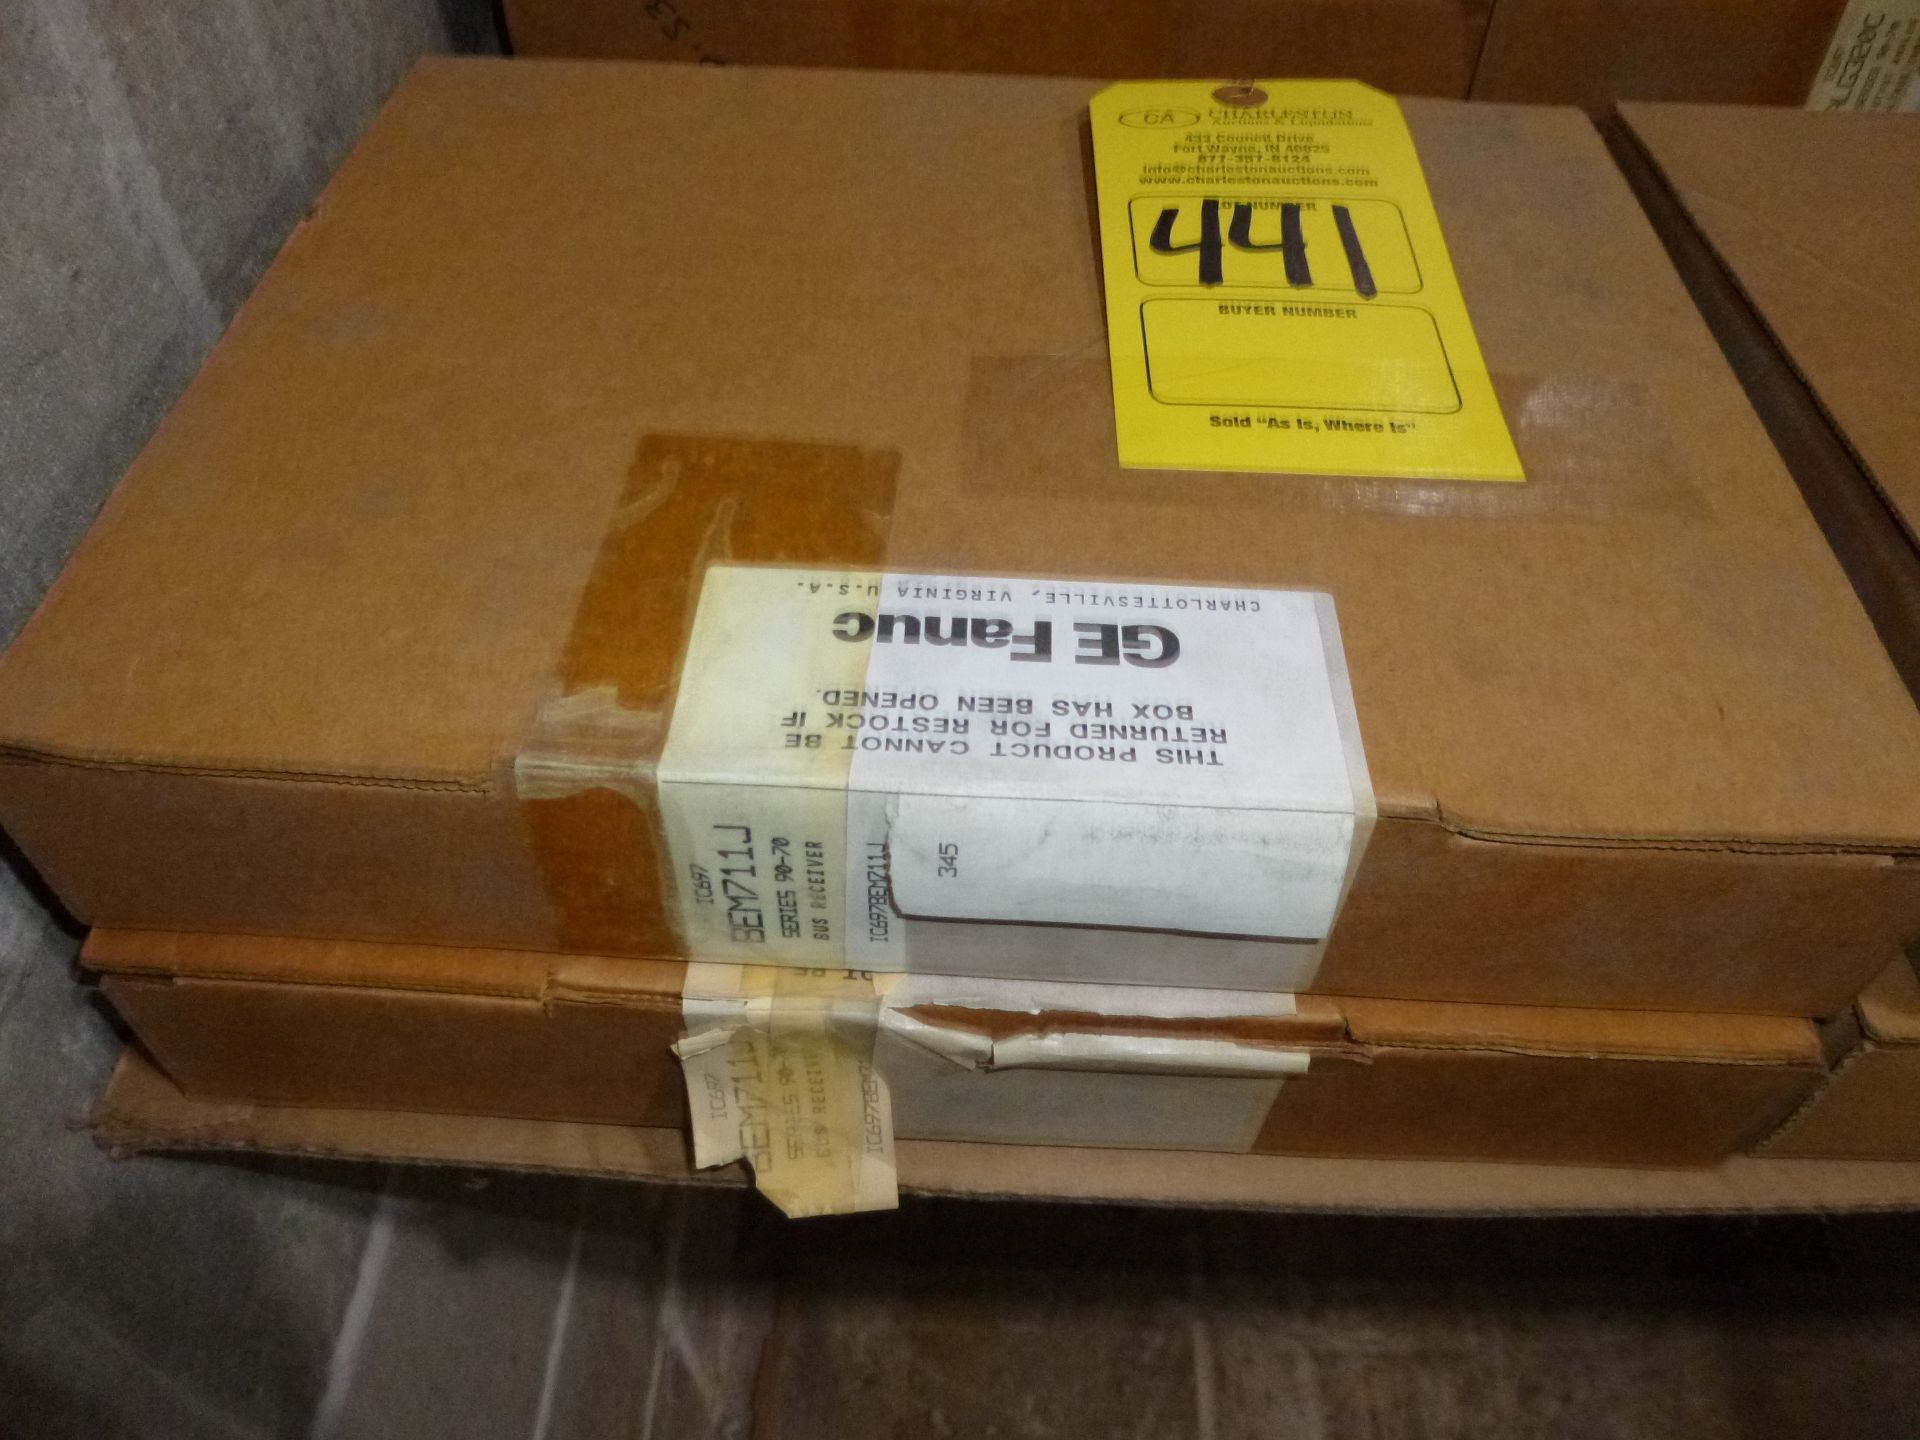 Qty 2 GE Fanuc IC697BEM711J, as always with Brolyn LLC auctions, all lots can be picked up from